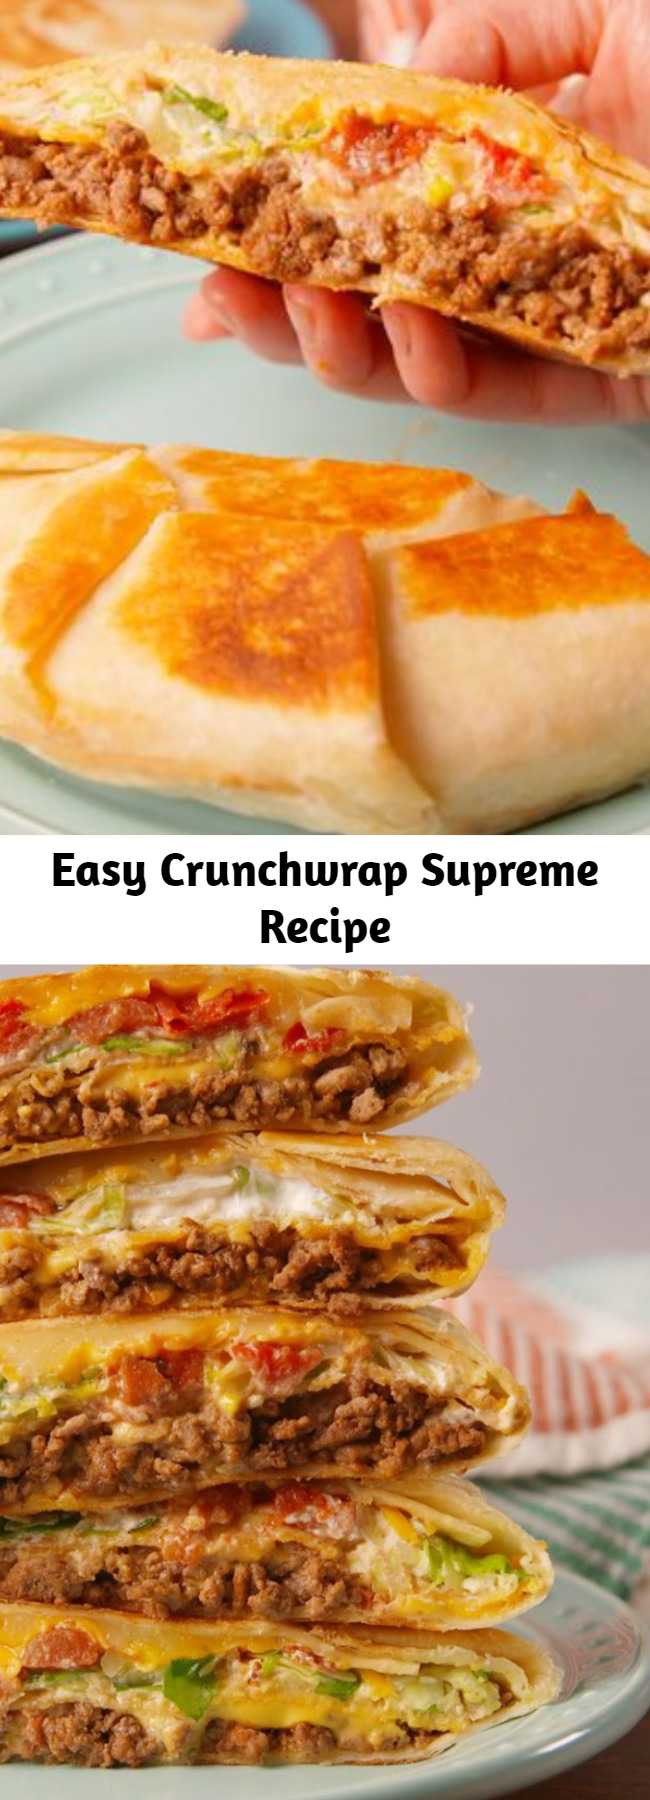 Easy Crunchwrap Supreme Recipe - Trust us, this is every bit as good as the real thing! This copycat recipe has all the main components of the iconic Taco Bell offering: seasoned ground beef, nacho cheese sauce, lettuce, tomatoes, sour cream, and, most importantly, a crunchy tostada shell. #easy #recipe #tacobell #crunchwrapsupreme #beef #nacho #cheese #tortilla #mexicanfood #copycat